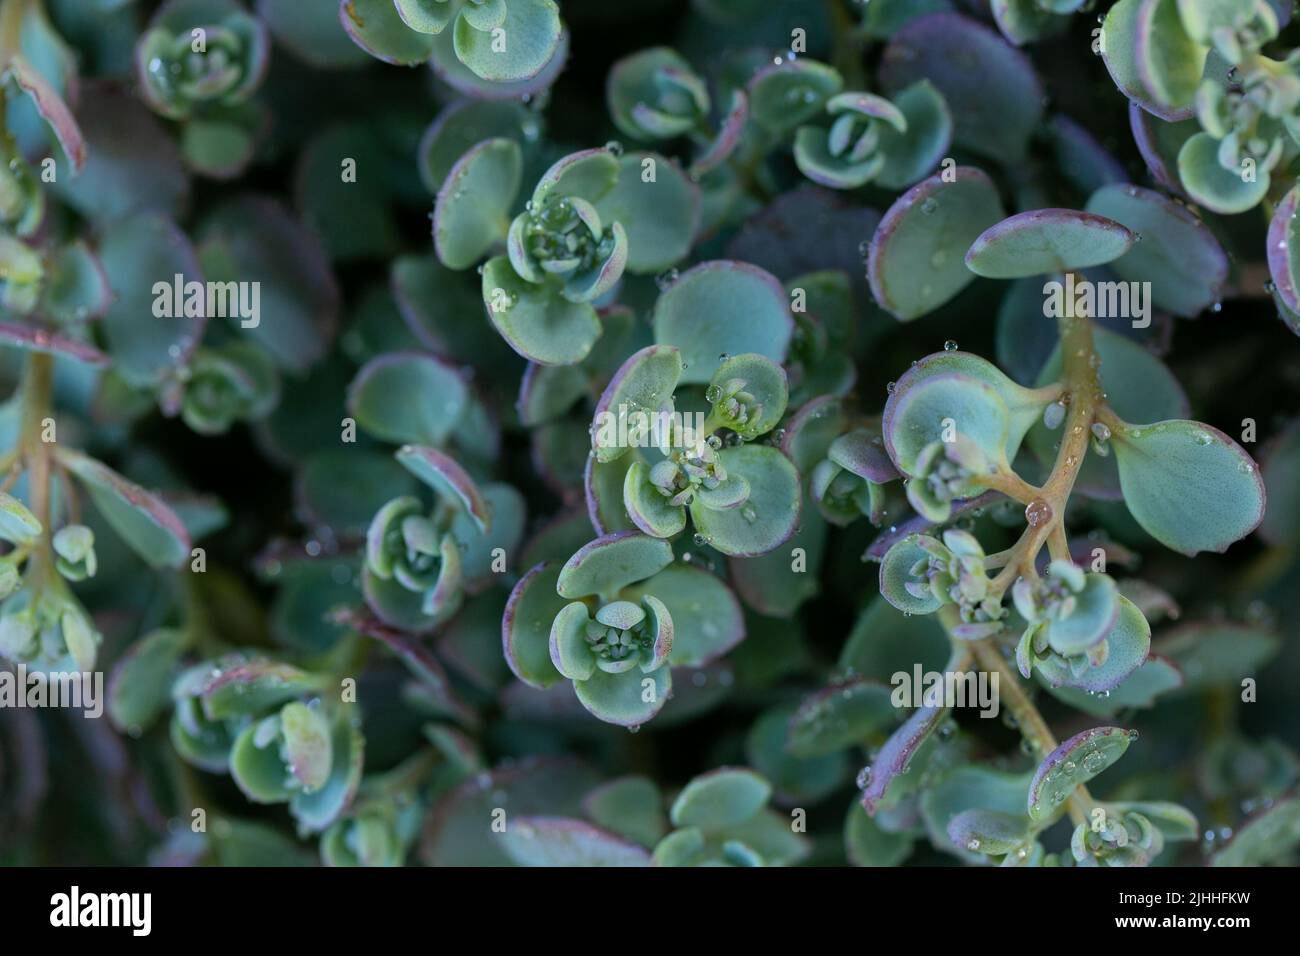 Succulents and sedums .Sedum eversa Ewersii. groundcover flower.Beautiful background in green and blue shades Stock Photo